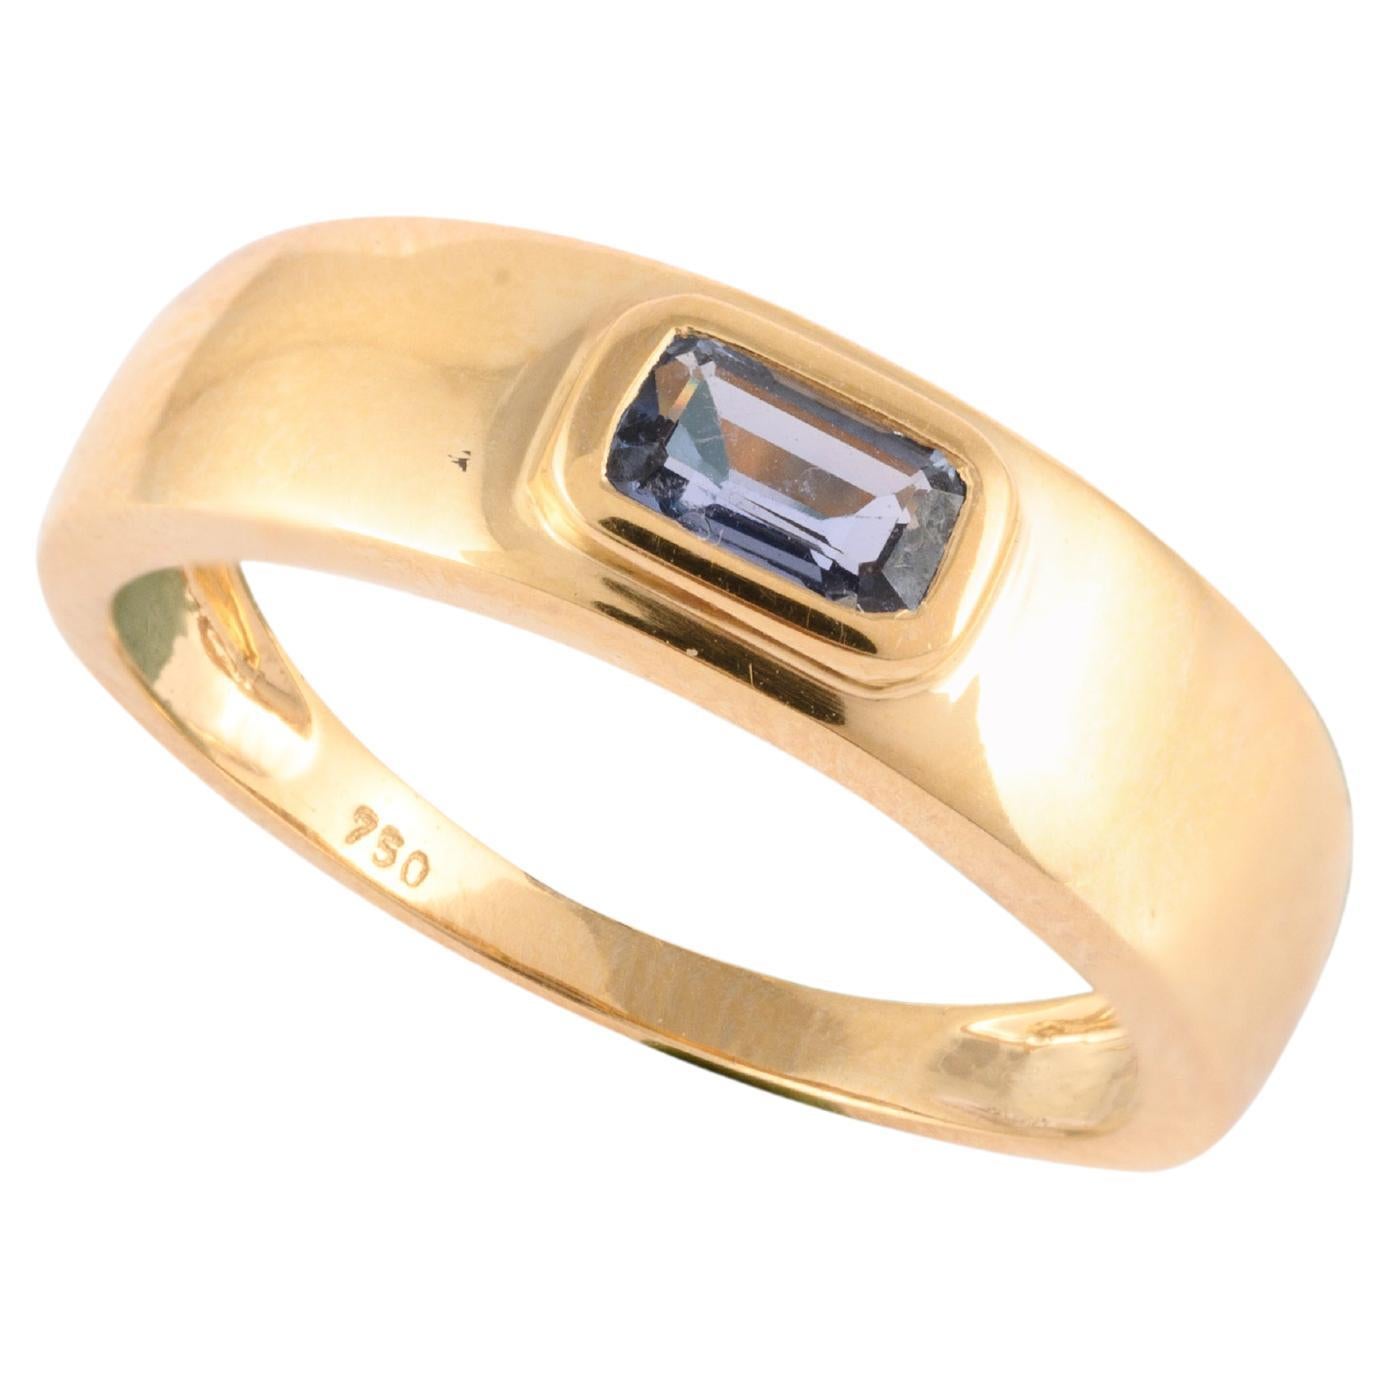 Genuine Tanzanite Ring Gift for Father in 18k Solid Yellow Gold